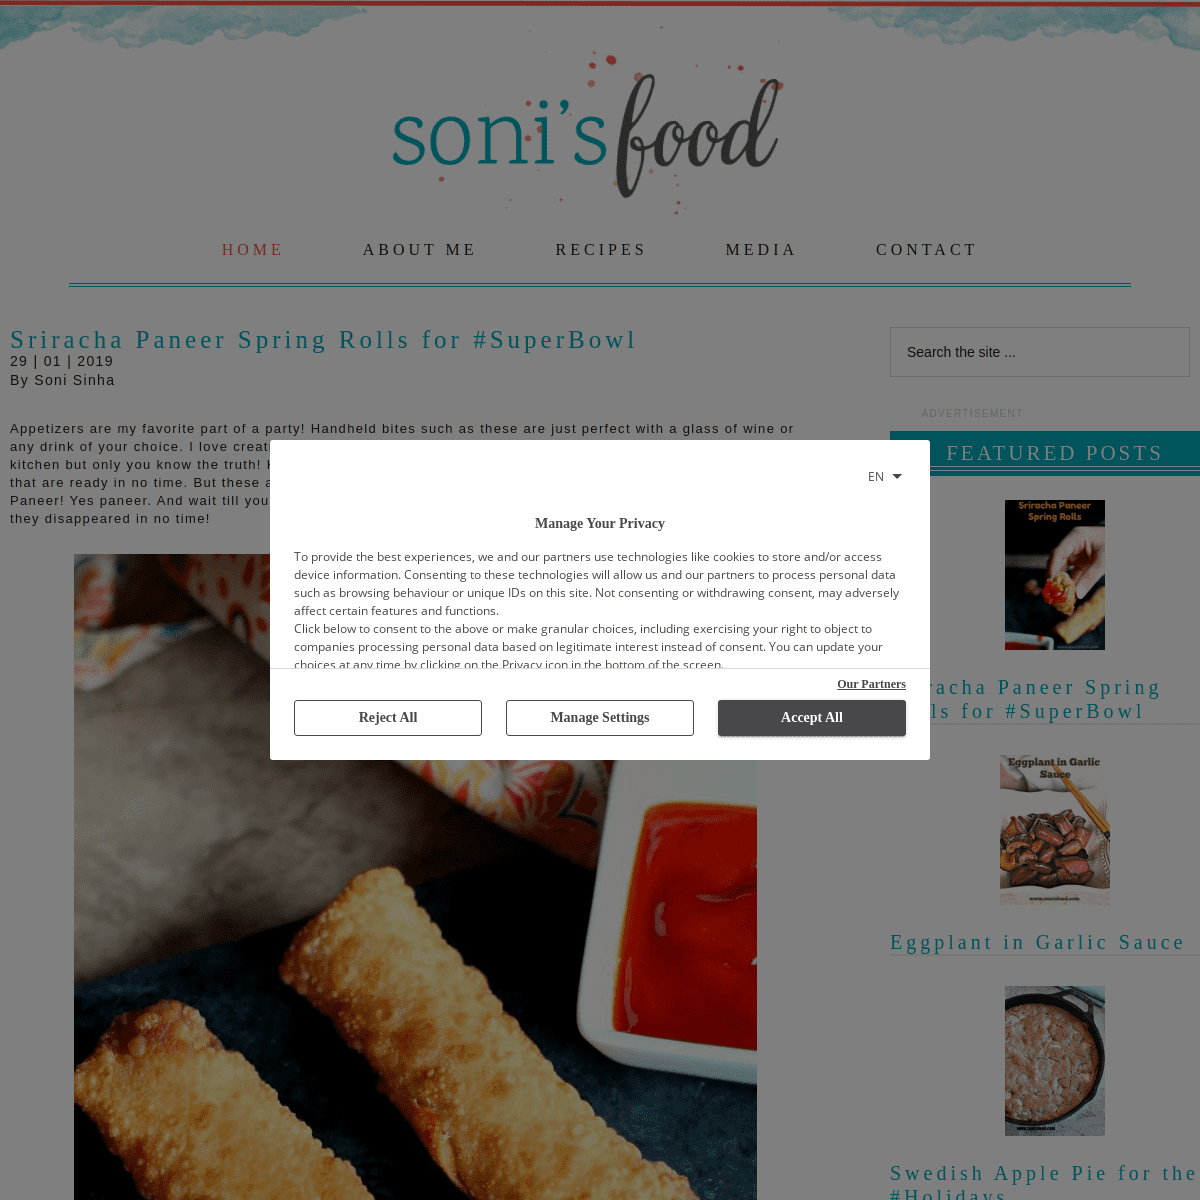 A complete backup of https://sonisfood.com